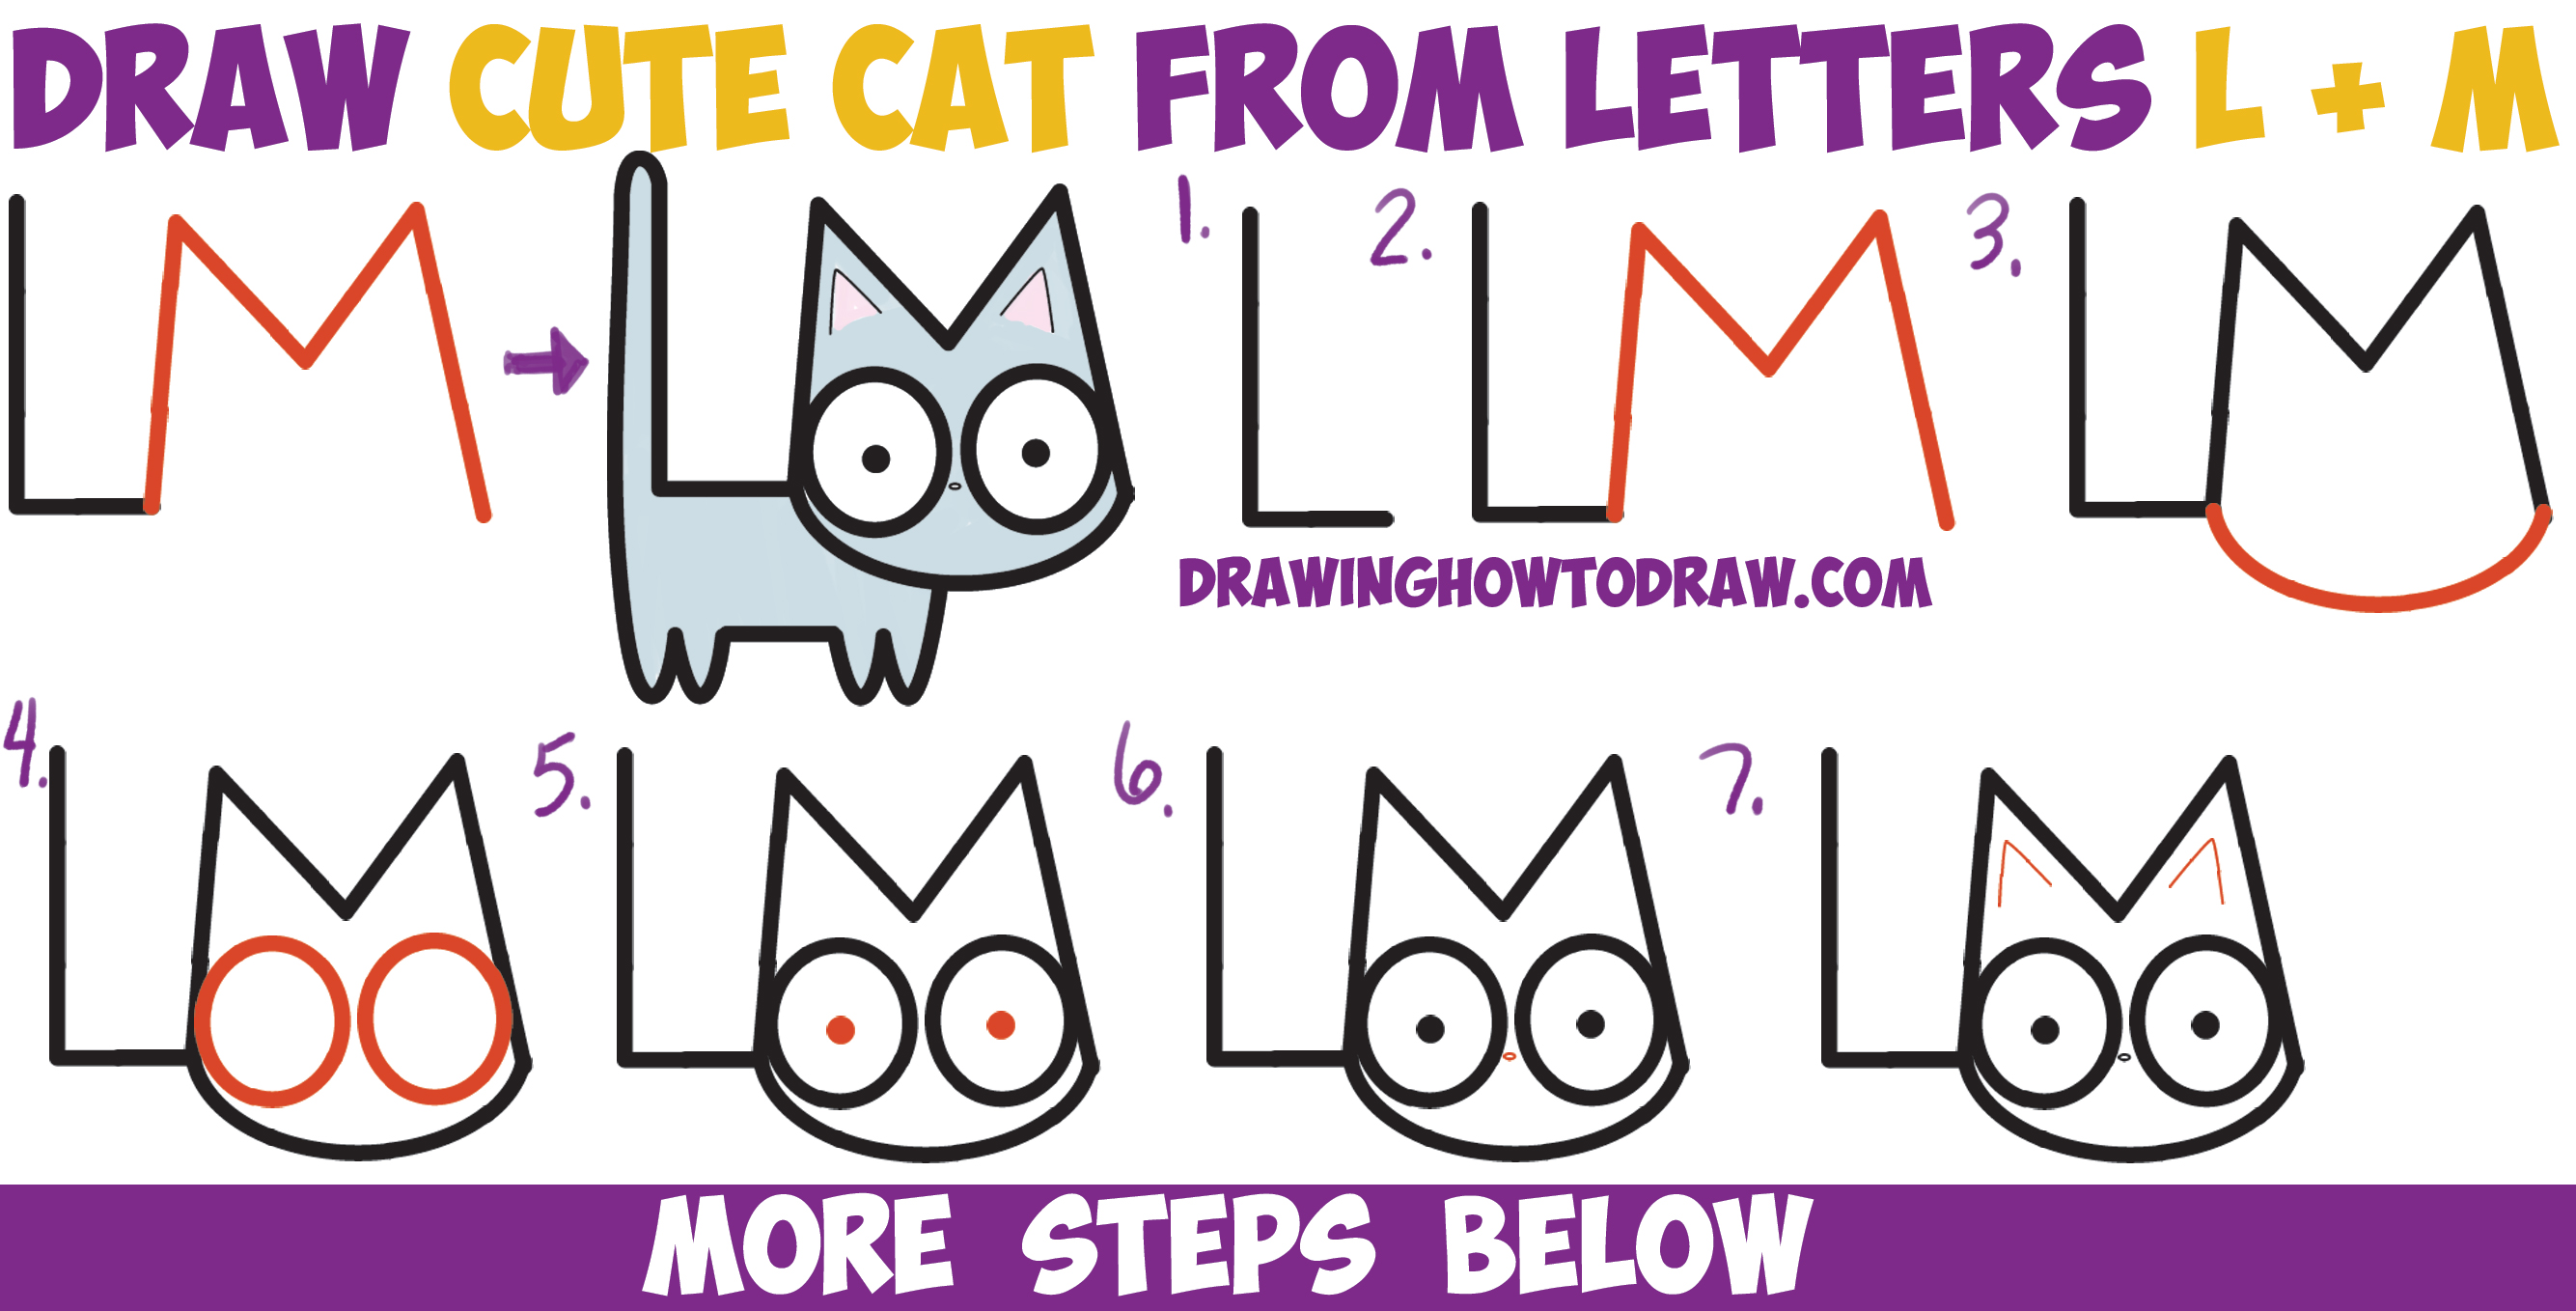 How to Draw a Cute Cartoon Kitten from Letters L + M Easy Step by Step  Drawing Tutorial for Kids - How to Draw Step by Step Drawing Tutorials